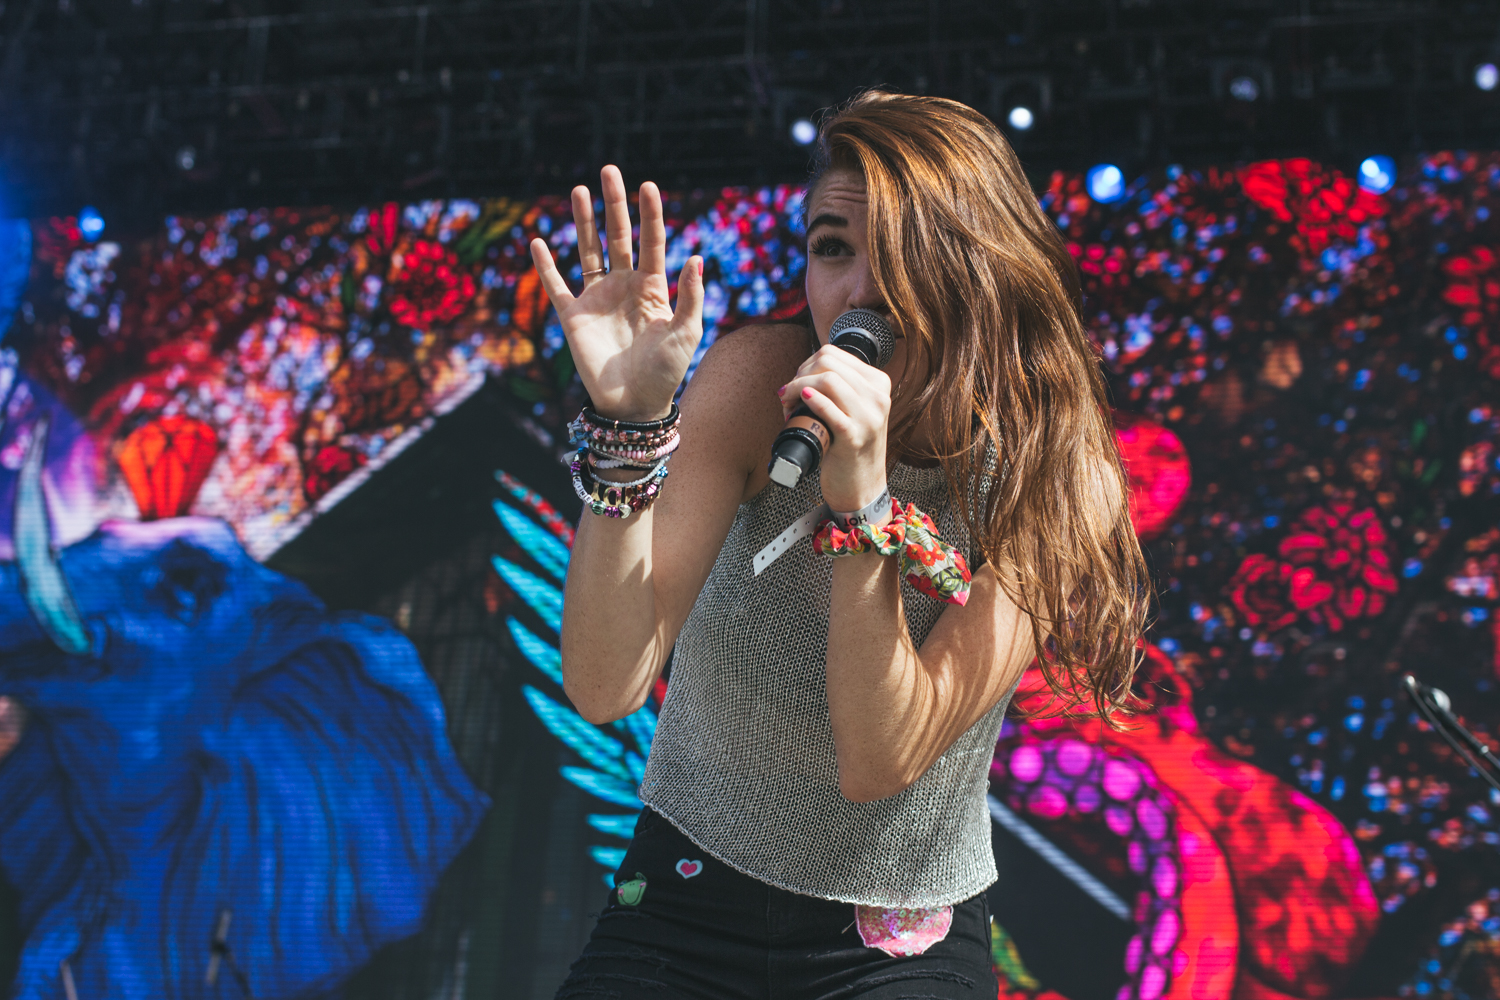 Mandy Lee of Misterwives